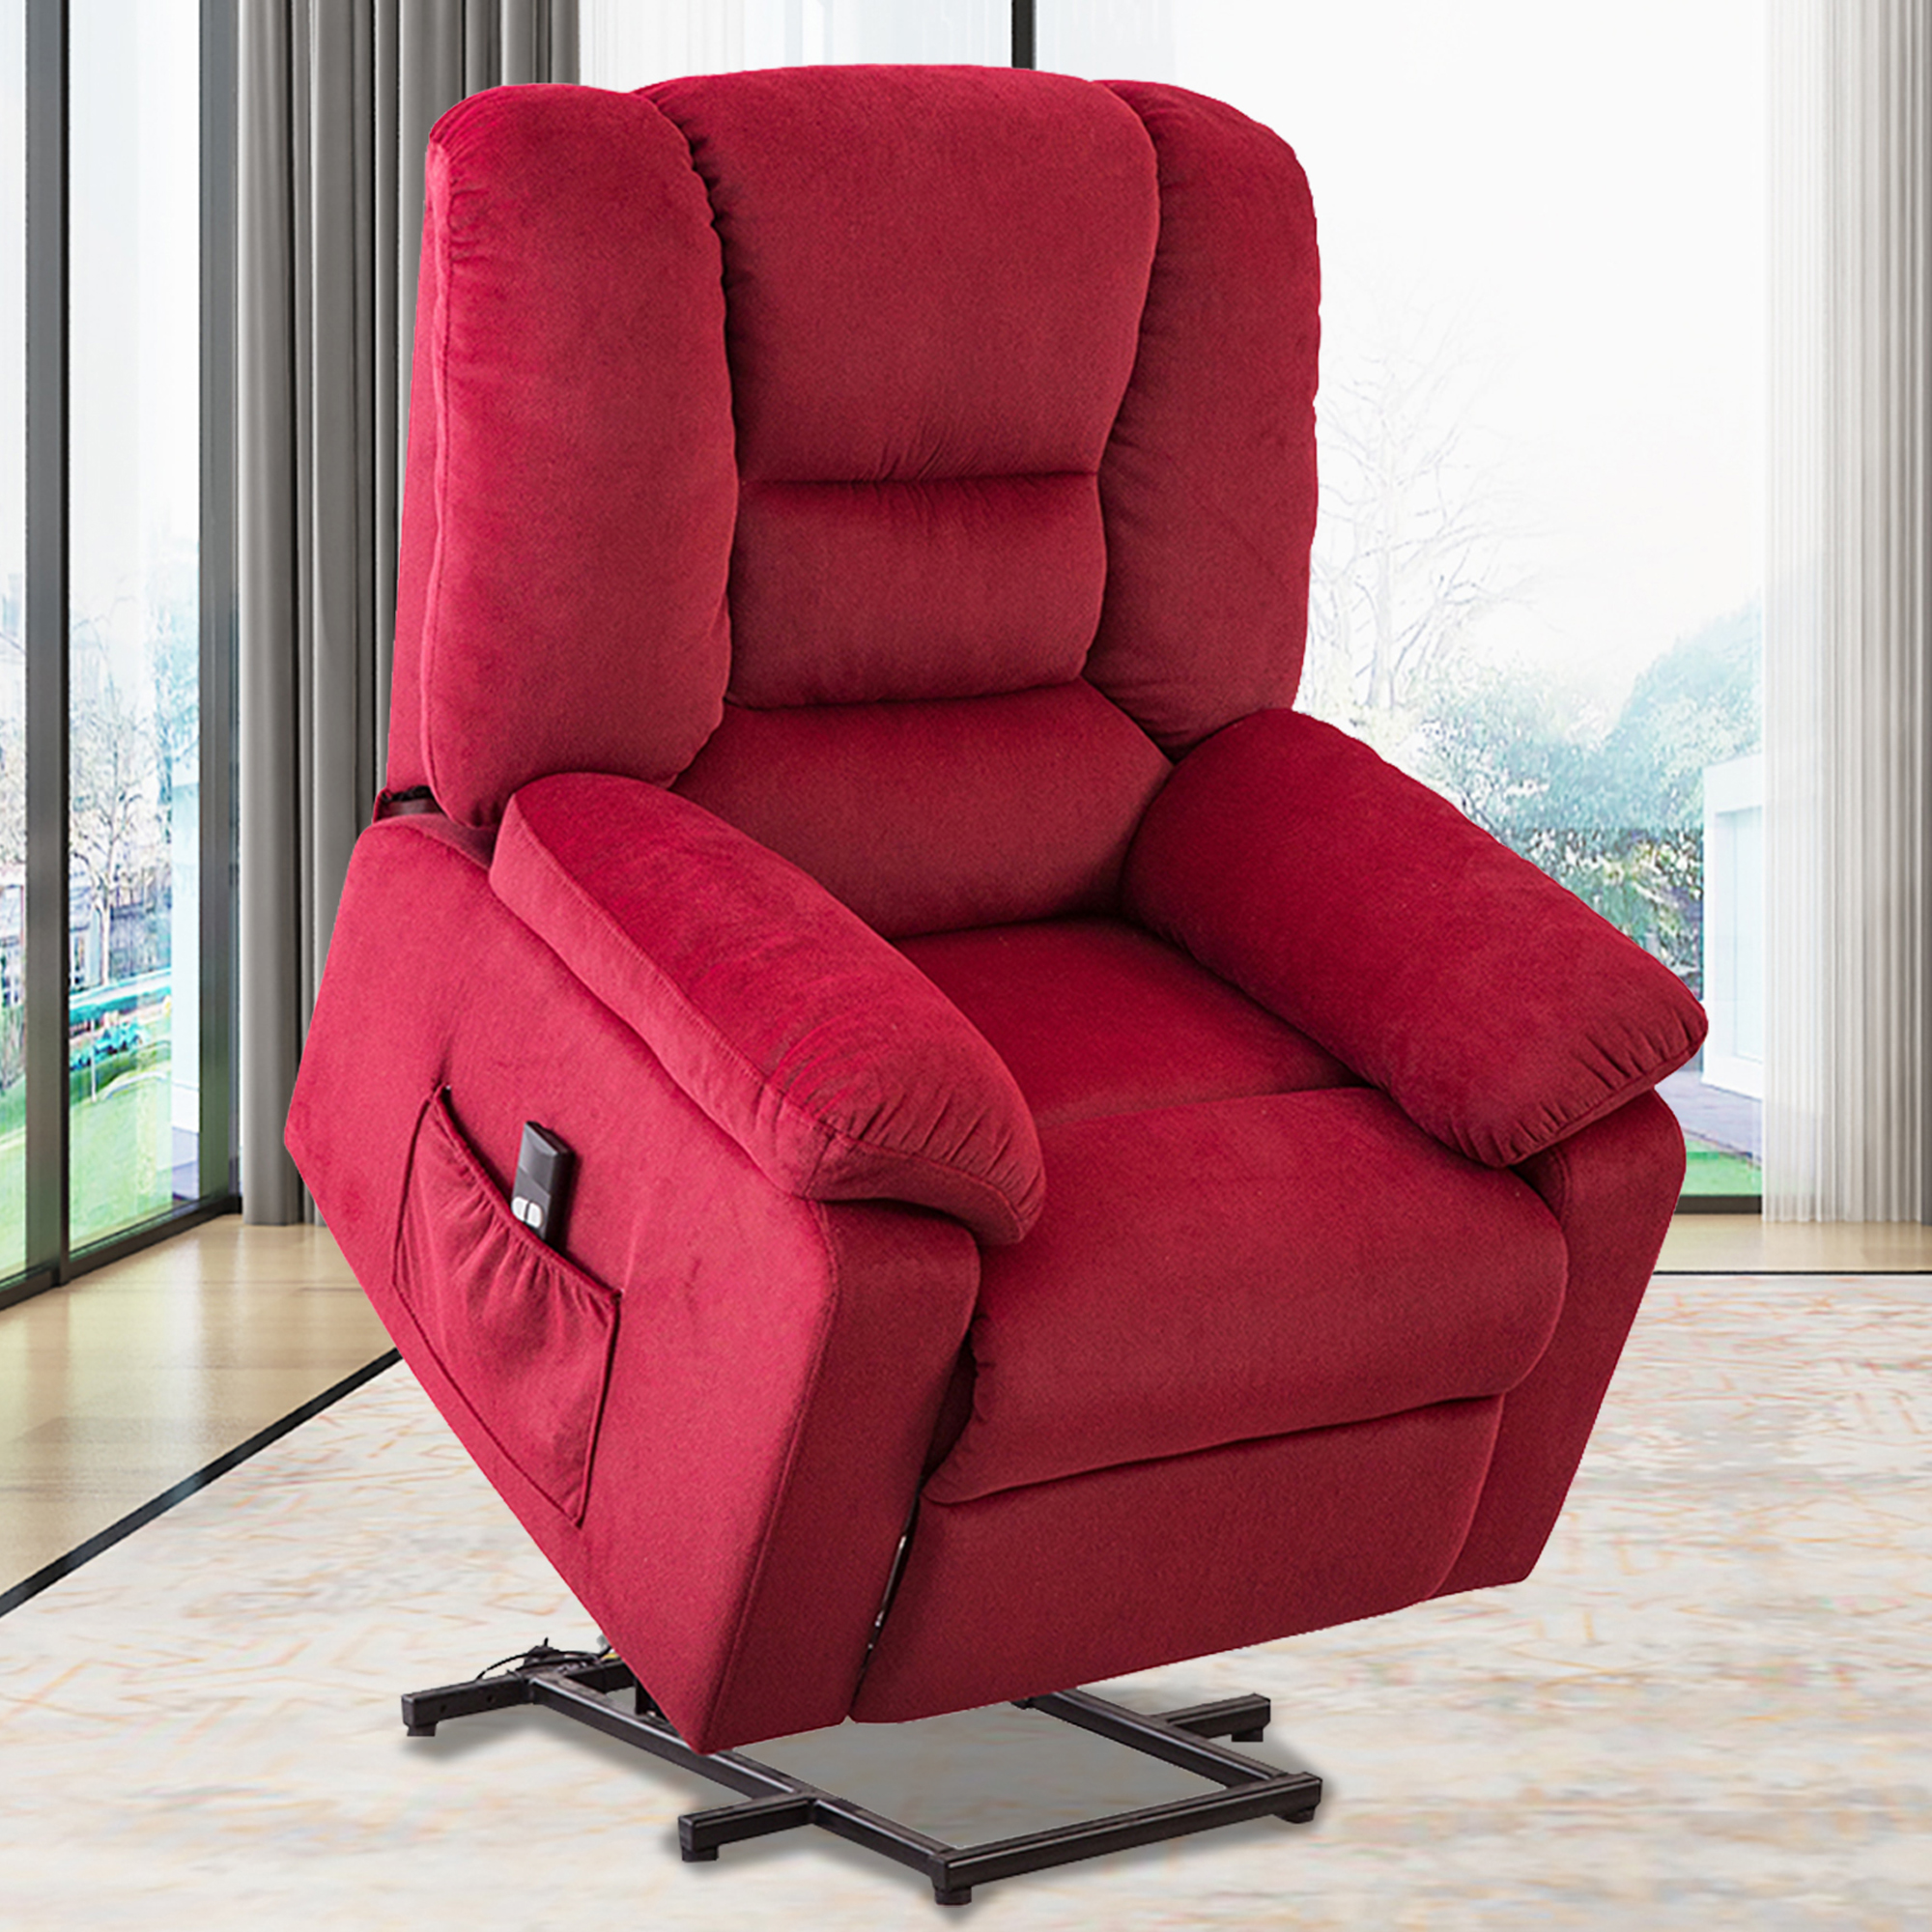 Kai Chen Breathable Leather Power Lift Recliner Chair for Elderly